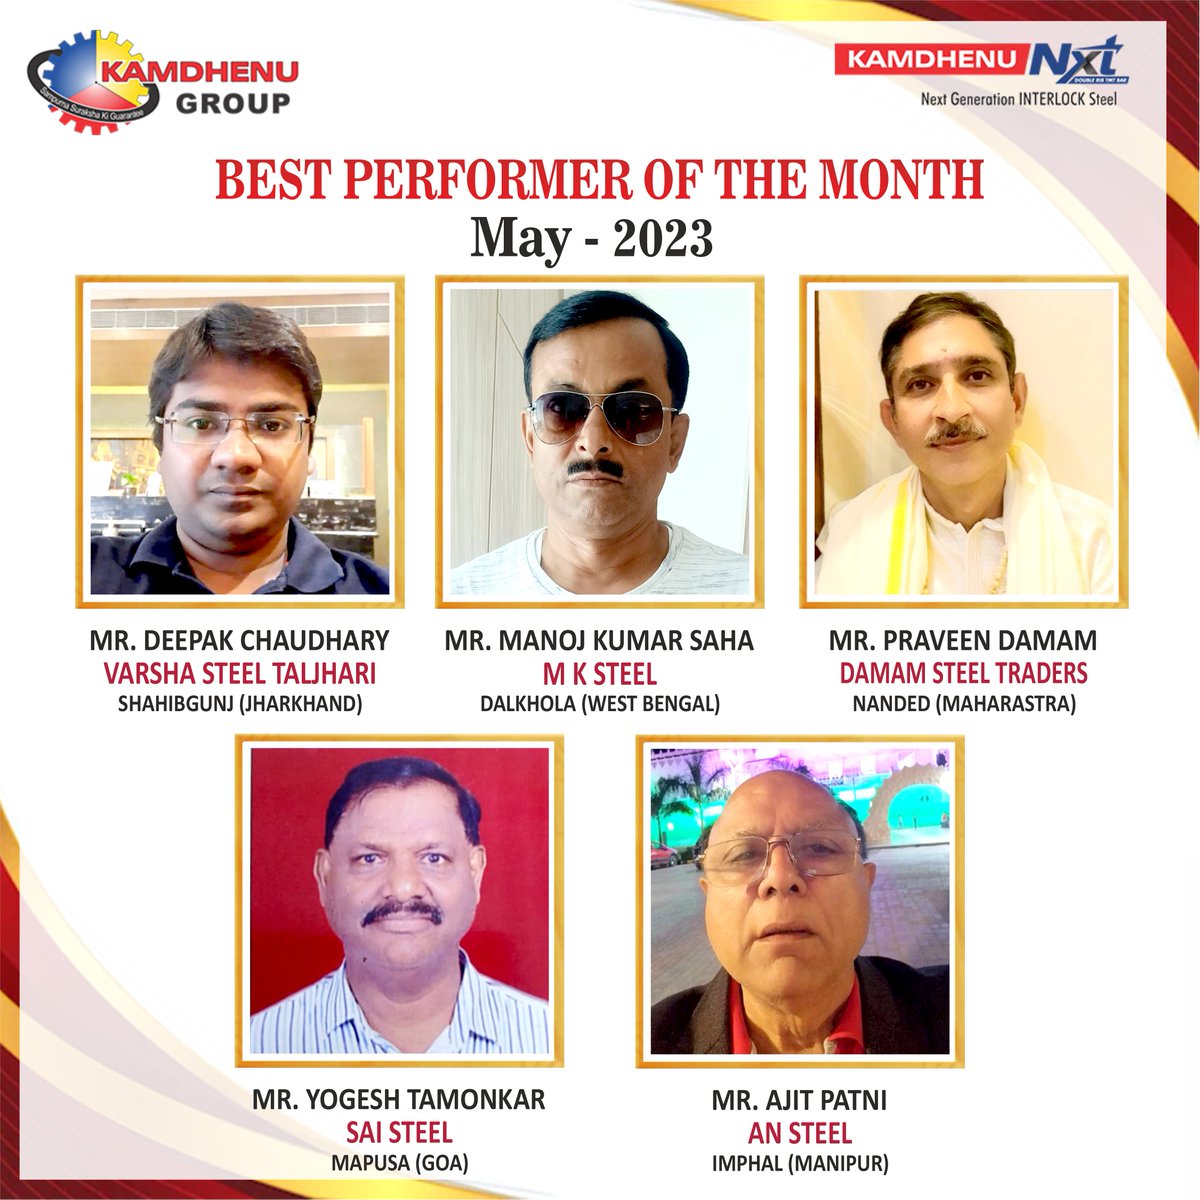 A thunderous applause to our exceptional top performers of May 2023. Their unwavering dedication, stellar skills & relentless pursuit of excellence have set new standards for success. We are proud that you all are part of our team!

#DealerOfTheMonth #BestPerformer #KamdhenuGroup